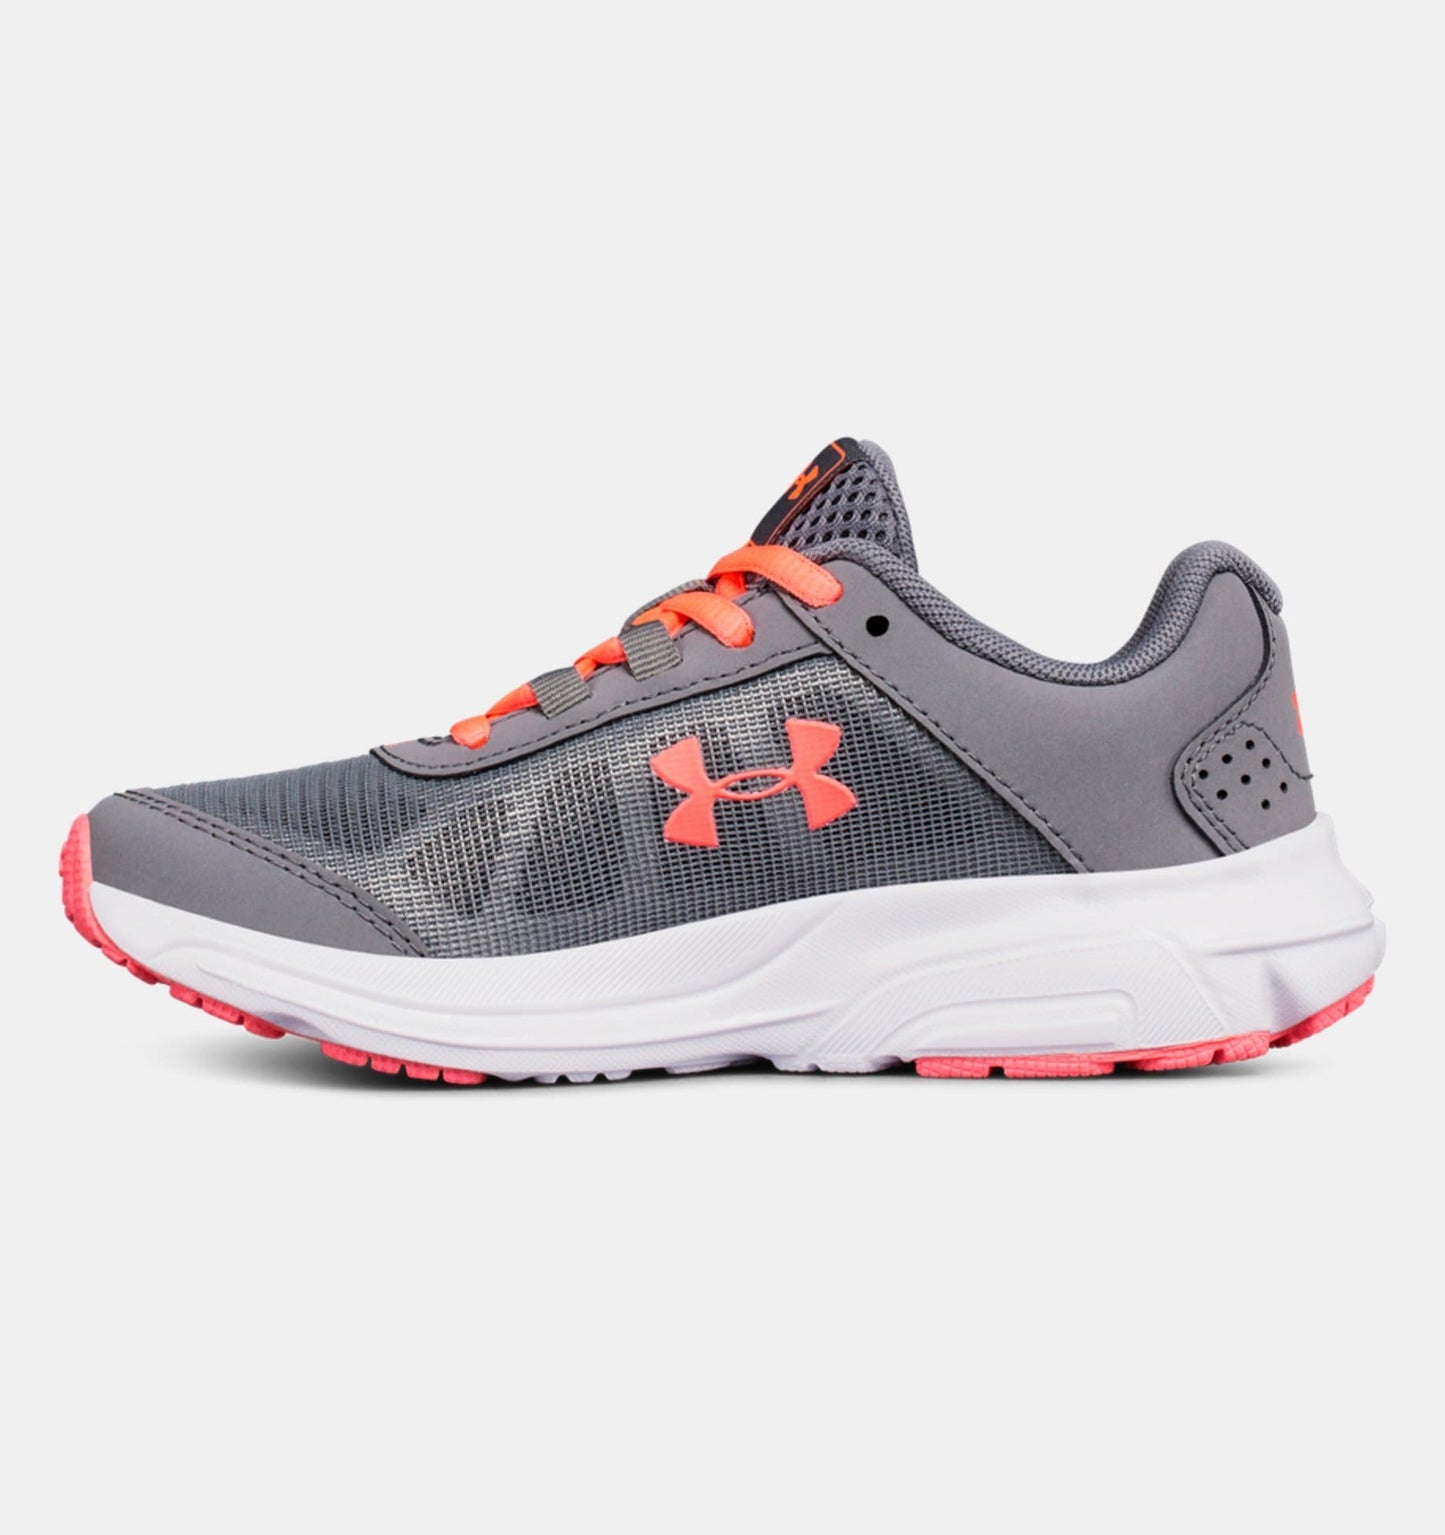 UNDER ARMOUR Kids Shoes 32 / Grey/Neon Pink GPS Rave 2